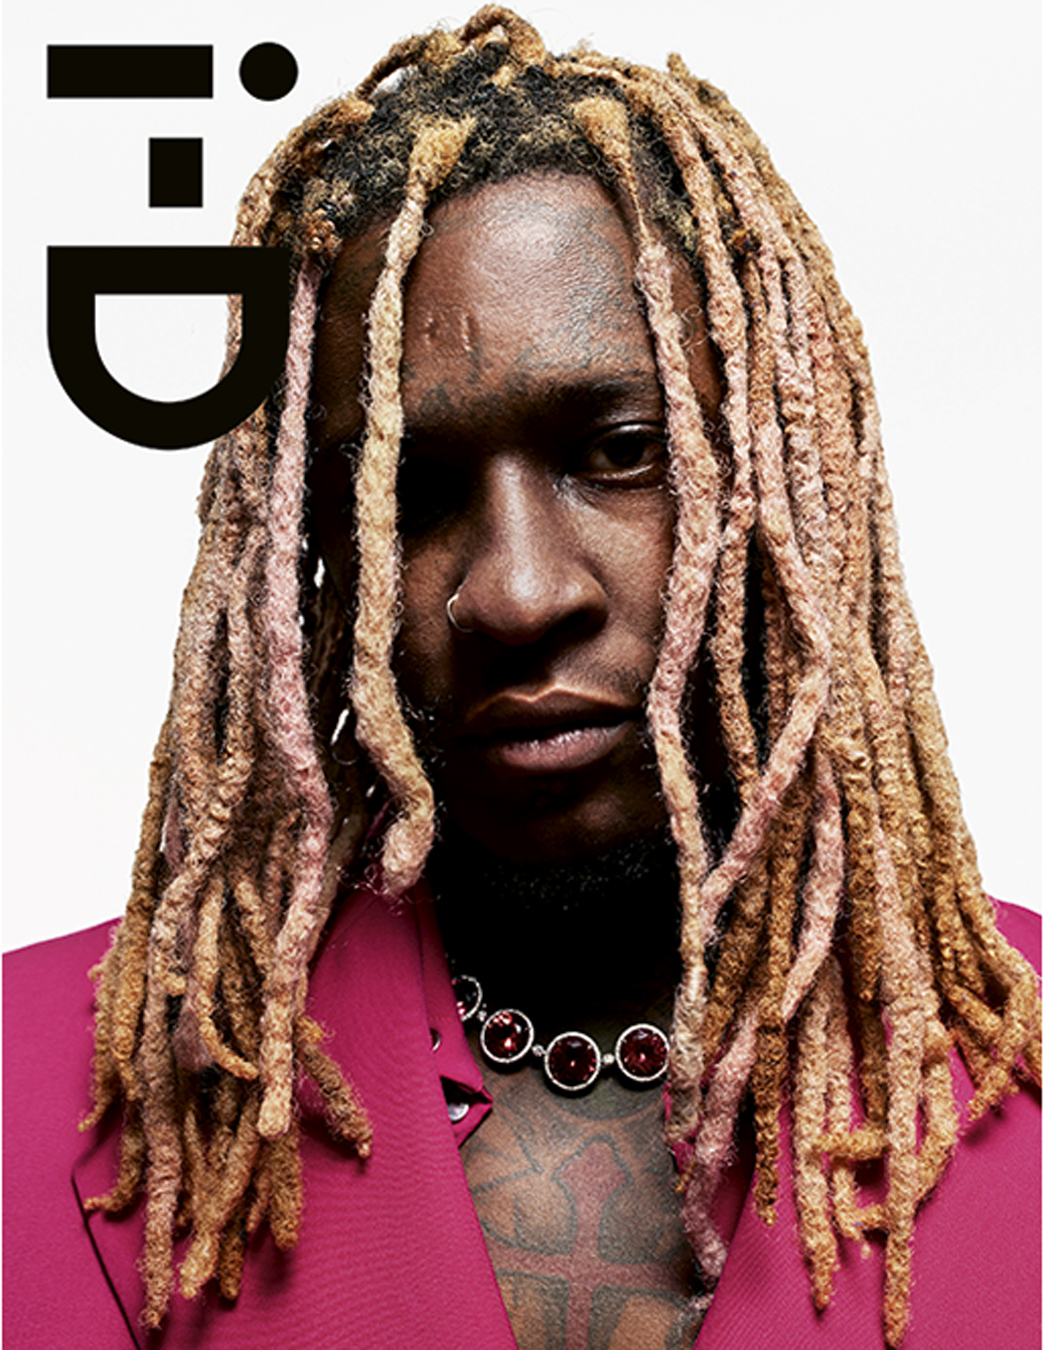 Young Thug on the cover of I-D 366 the out of the blue issue